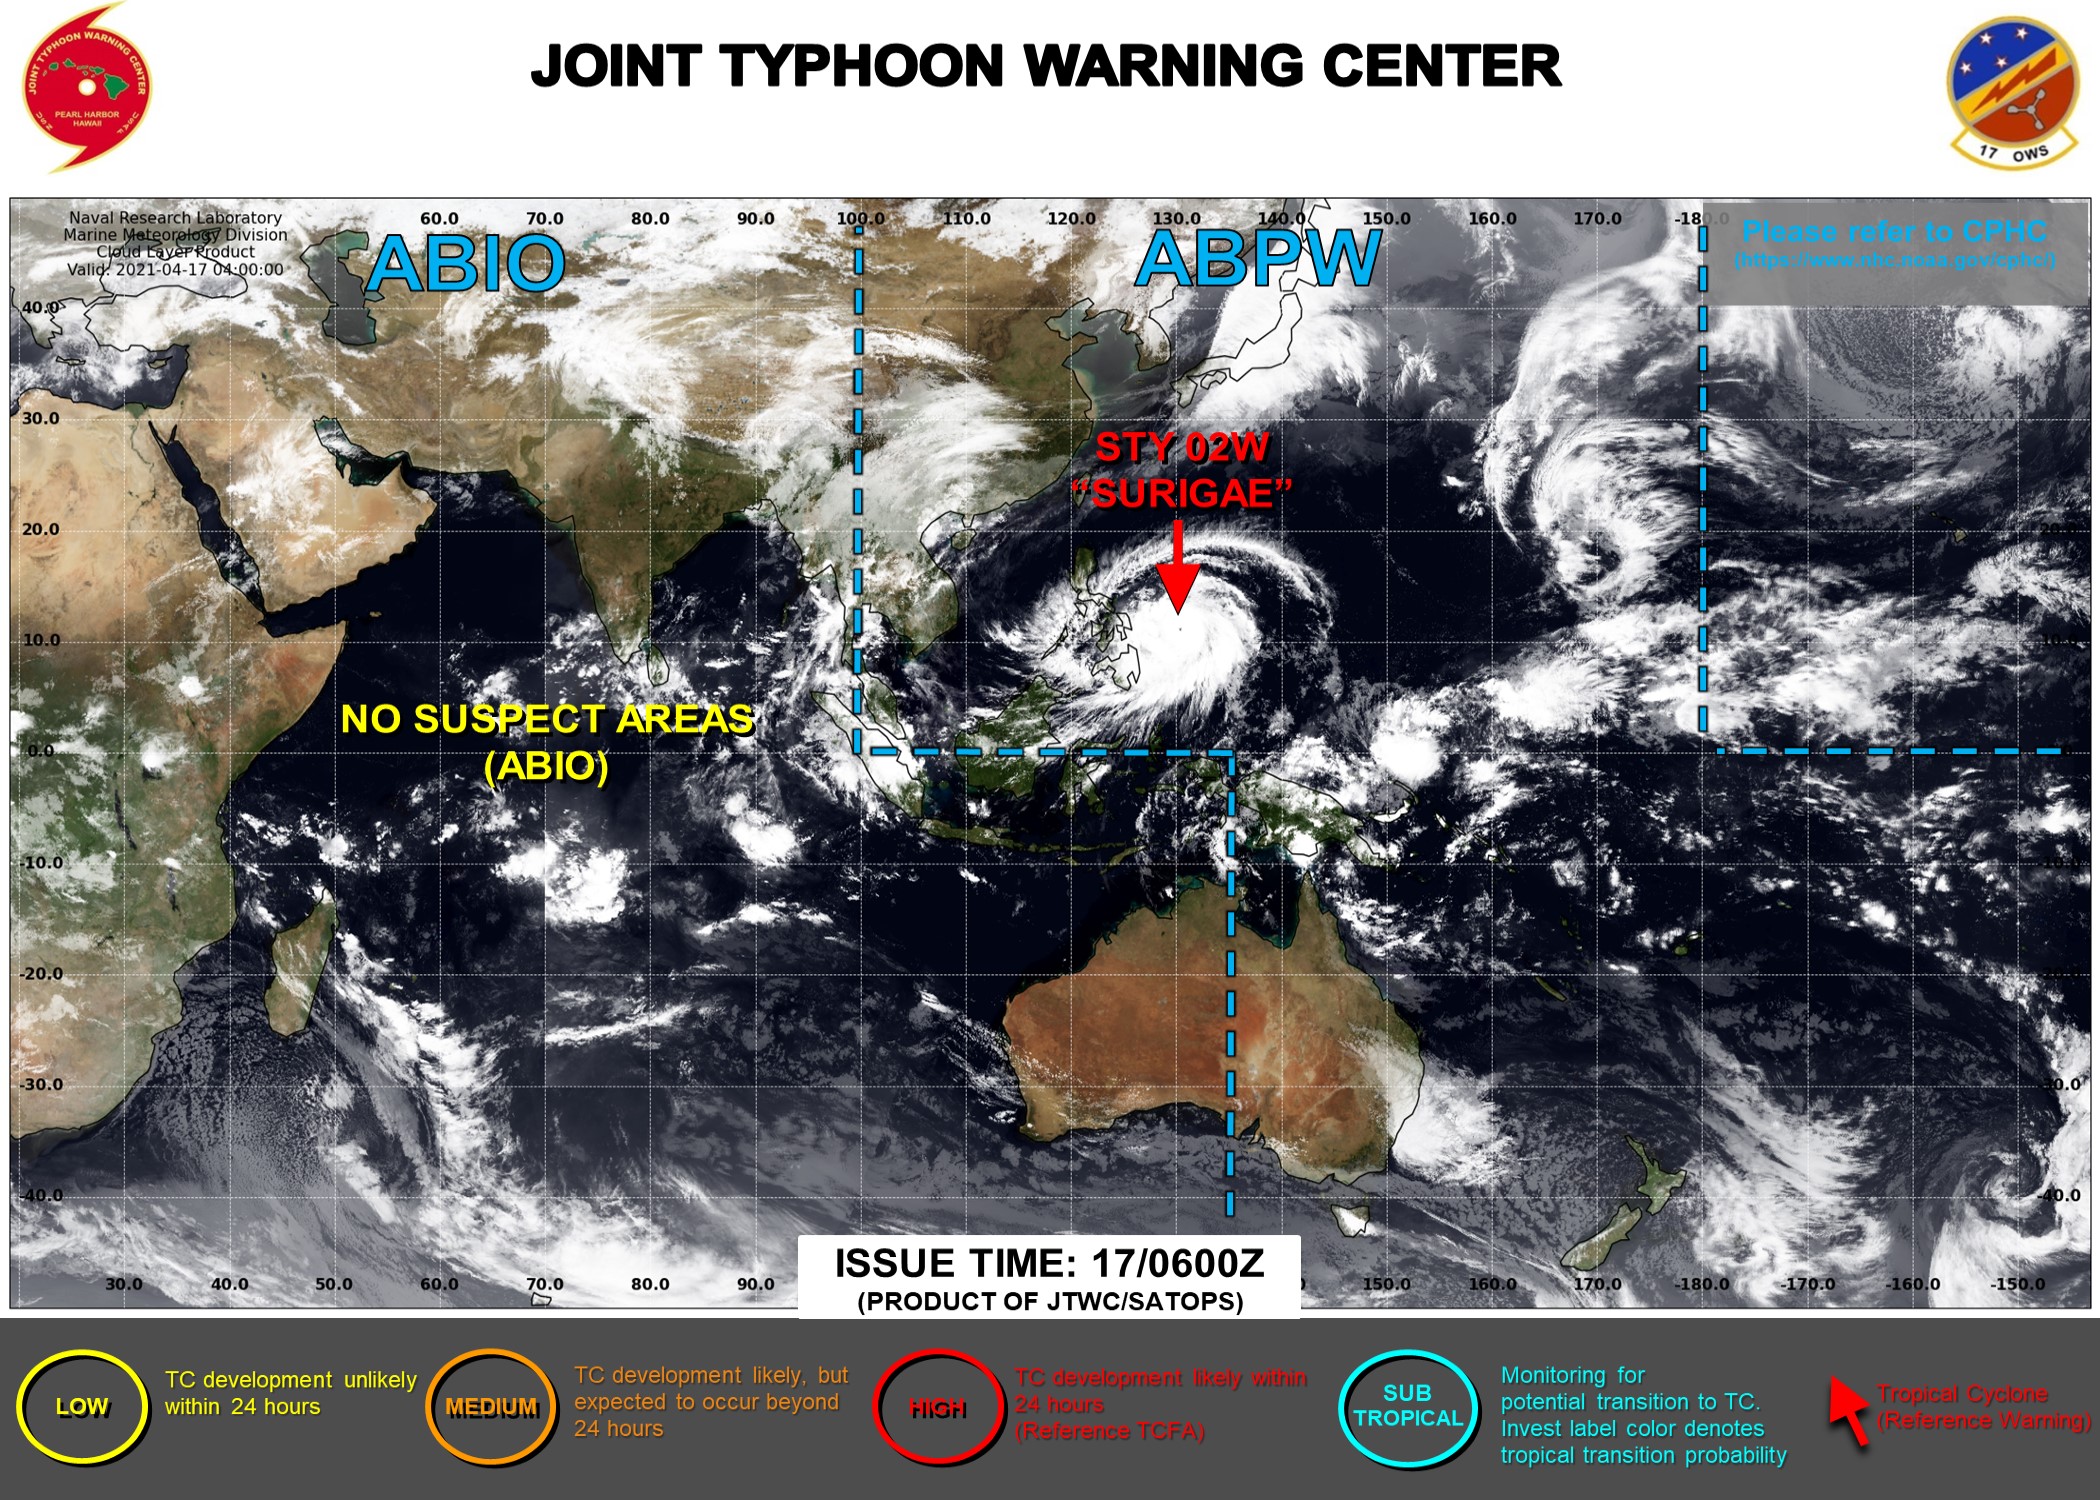 17/15UTC. THE JTWC HAS BEEN ISSUING 6HOURLY WARNINGS ON 02W(SURIGAE) AND 3HOURLY SATELLITE BULLETINS.